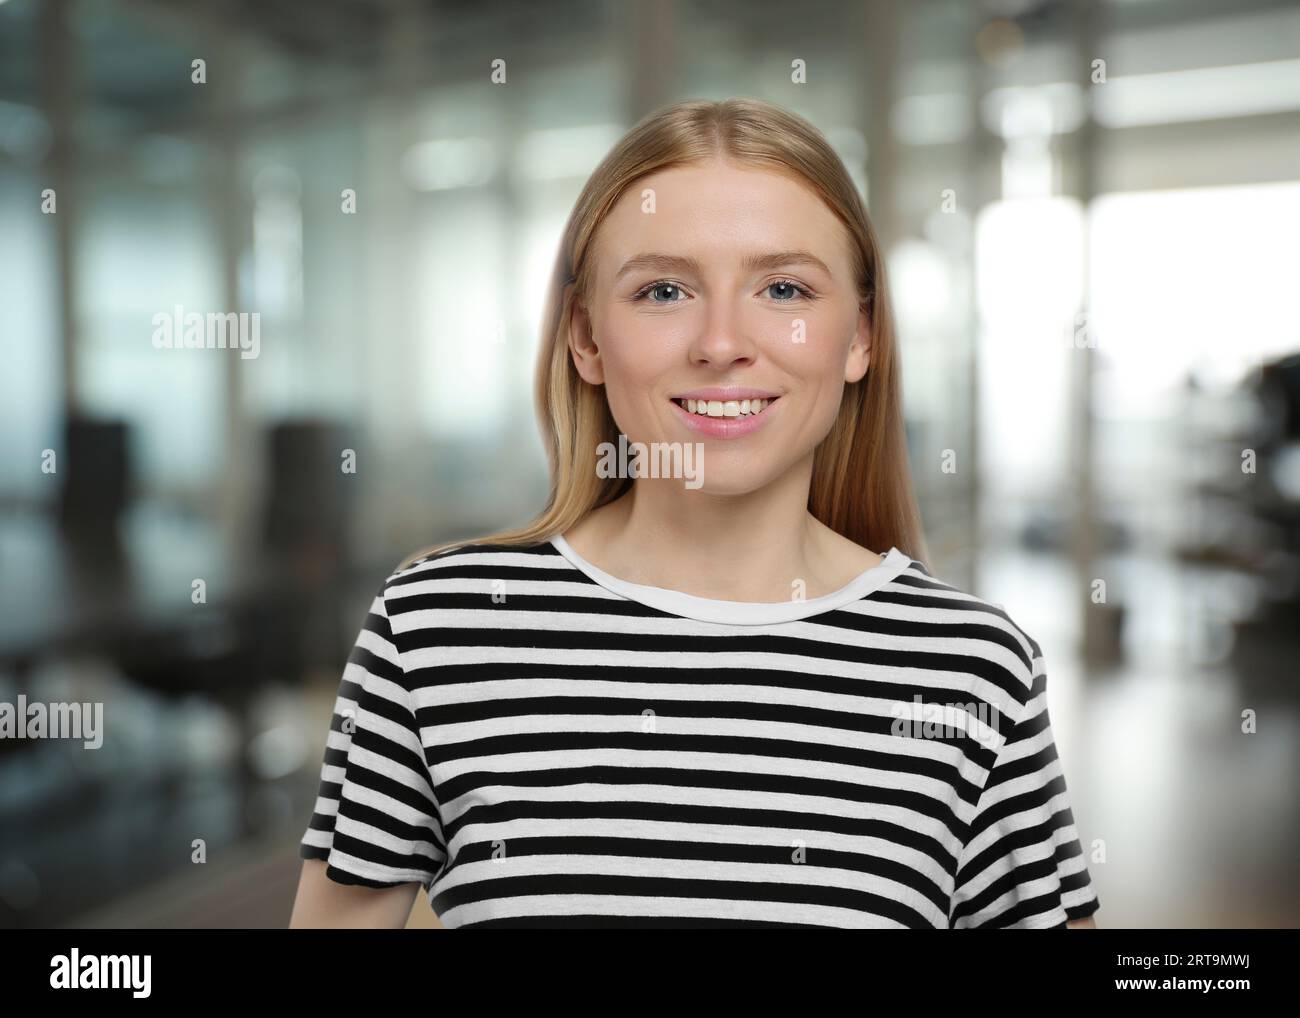 Portrait of happy woman in office. Pretty girl looking at camera and smiling on blurred background Stock Photo